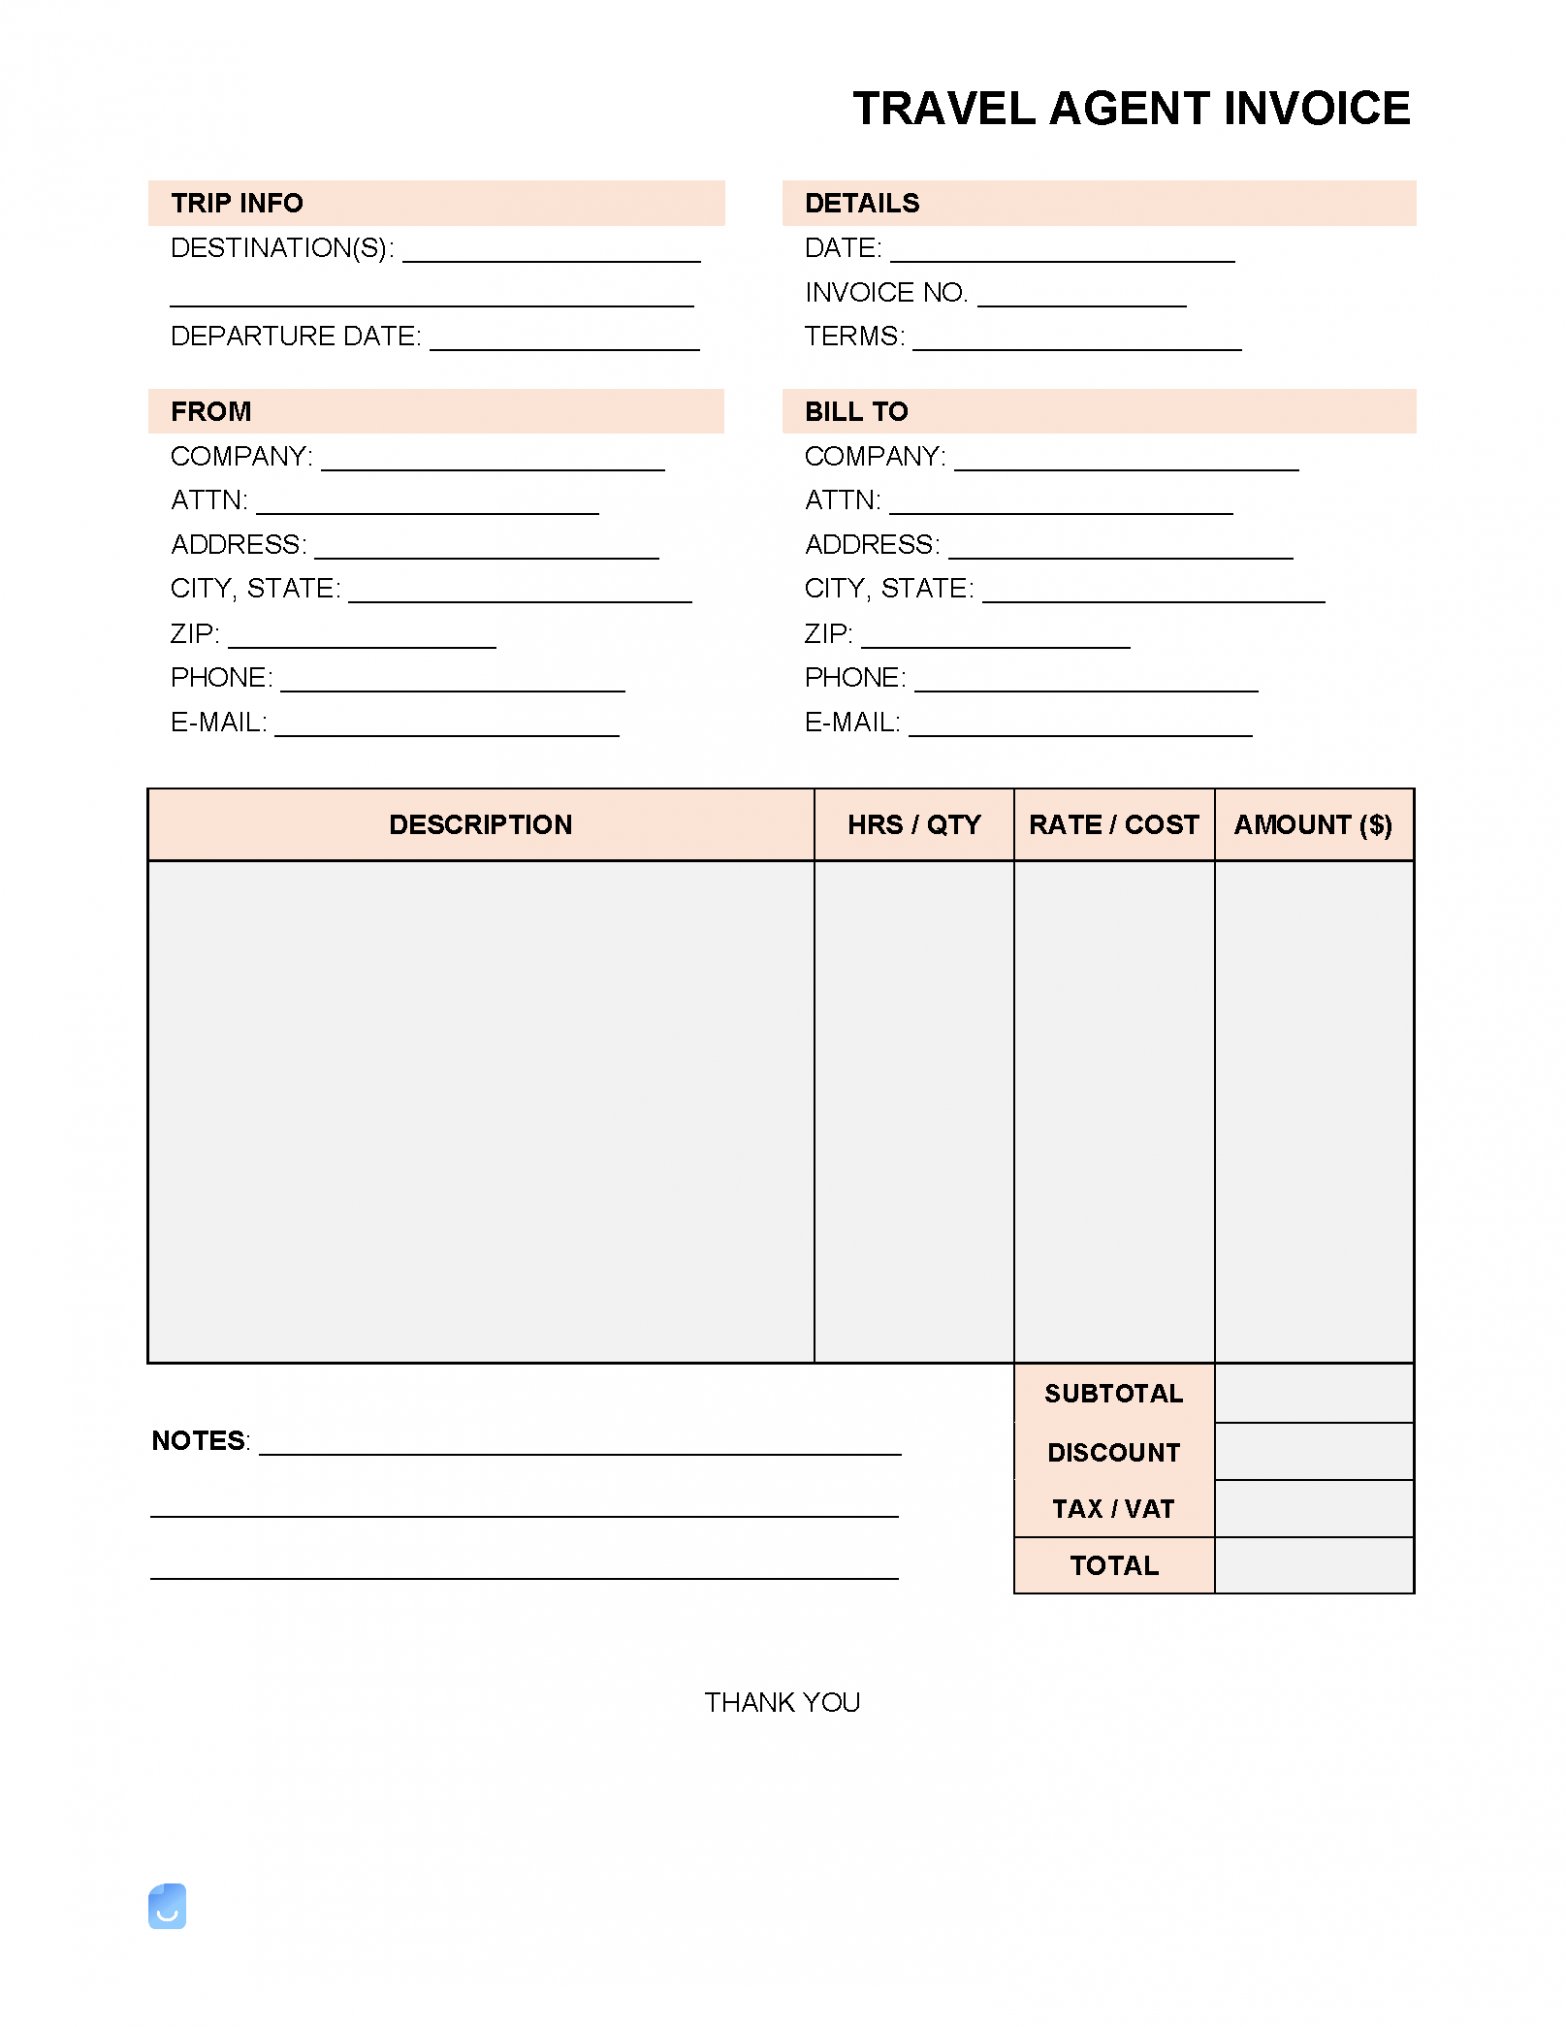 Sample Airline Ticket Invoice Template PPT